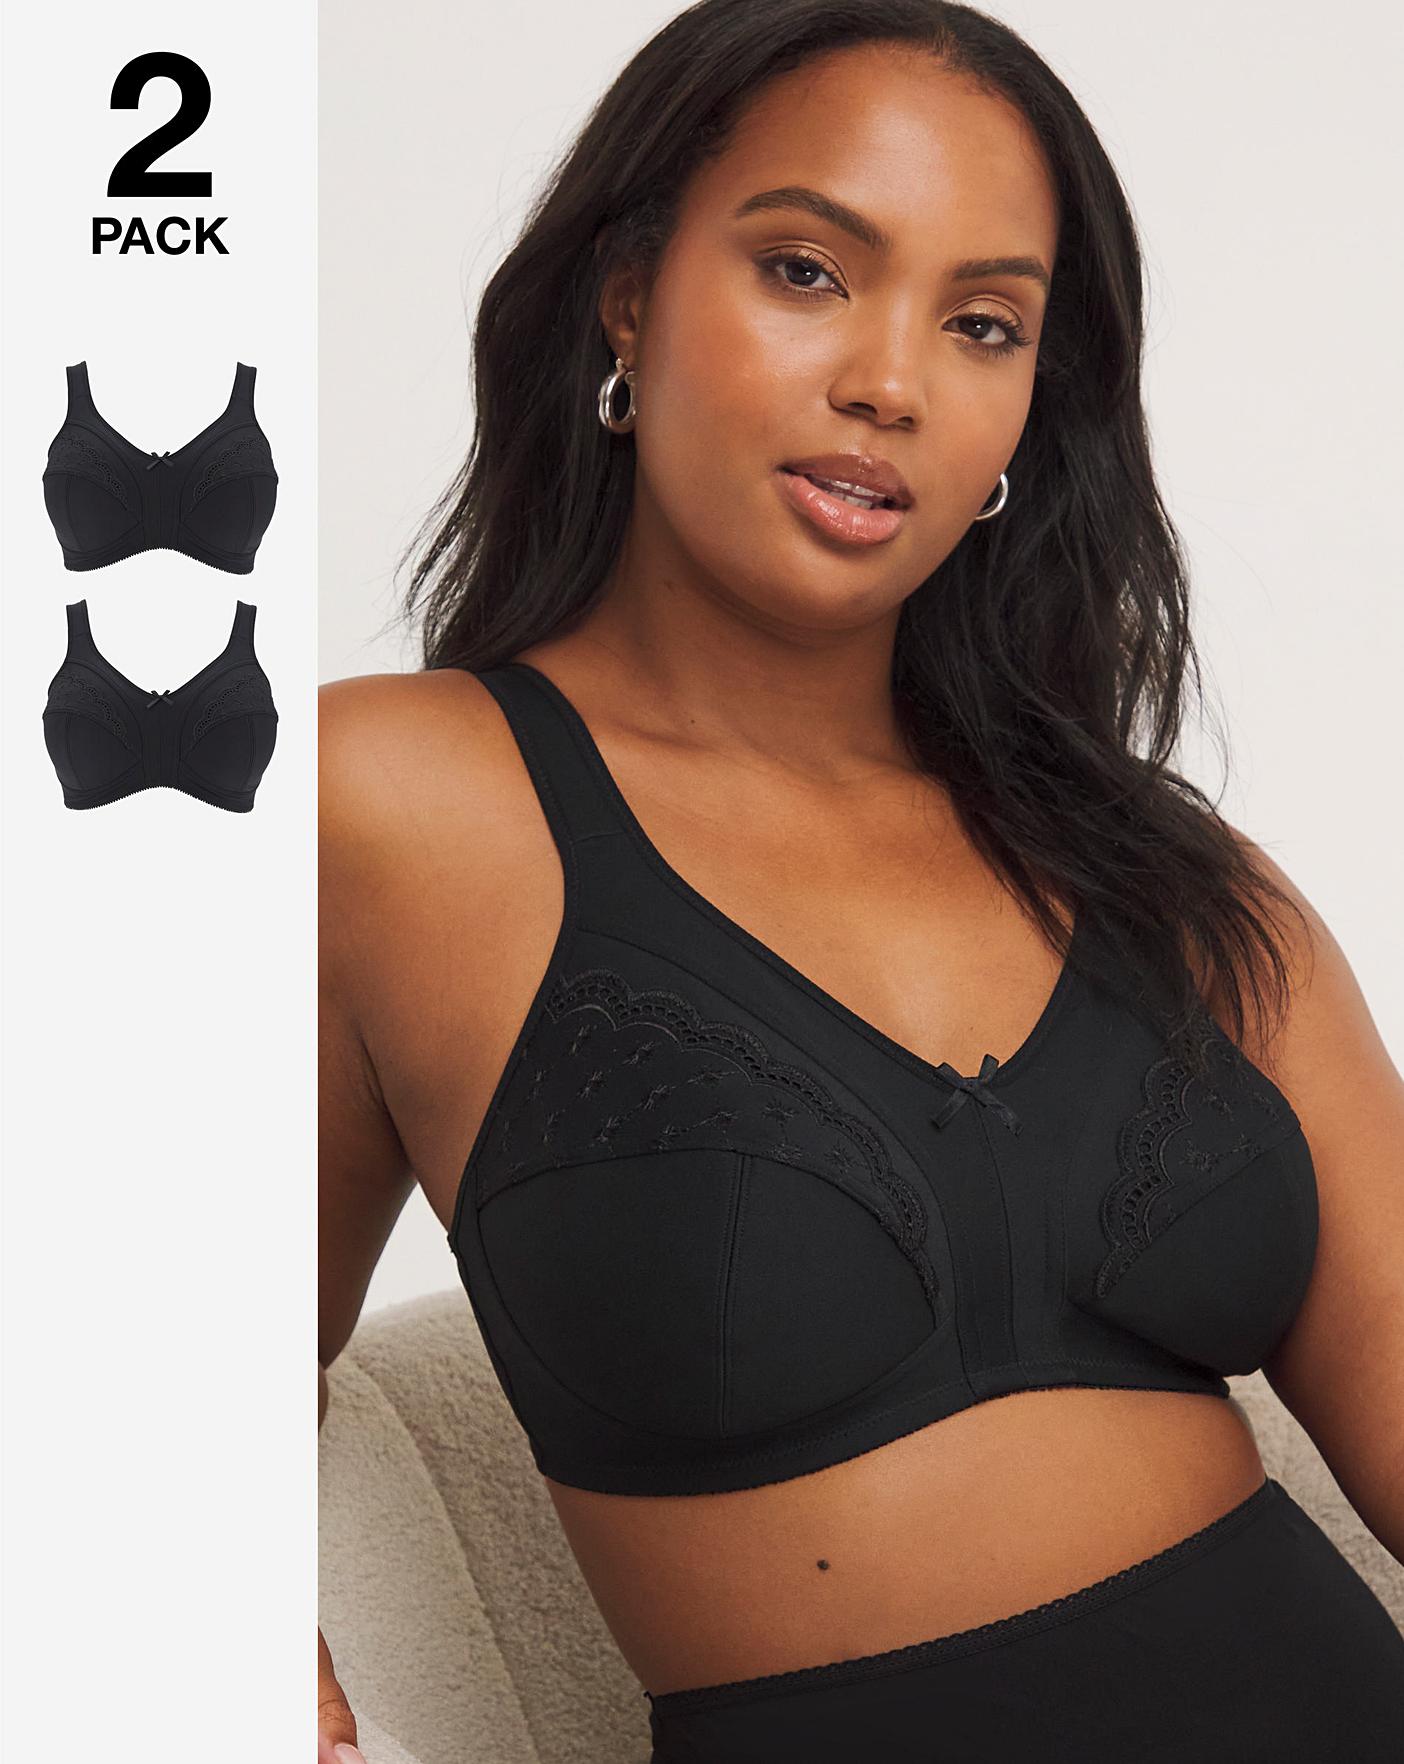 2 PACK Black & White Non-Wired Front Fastening Bras